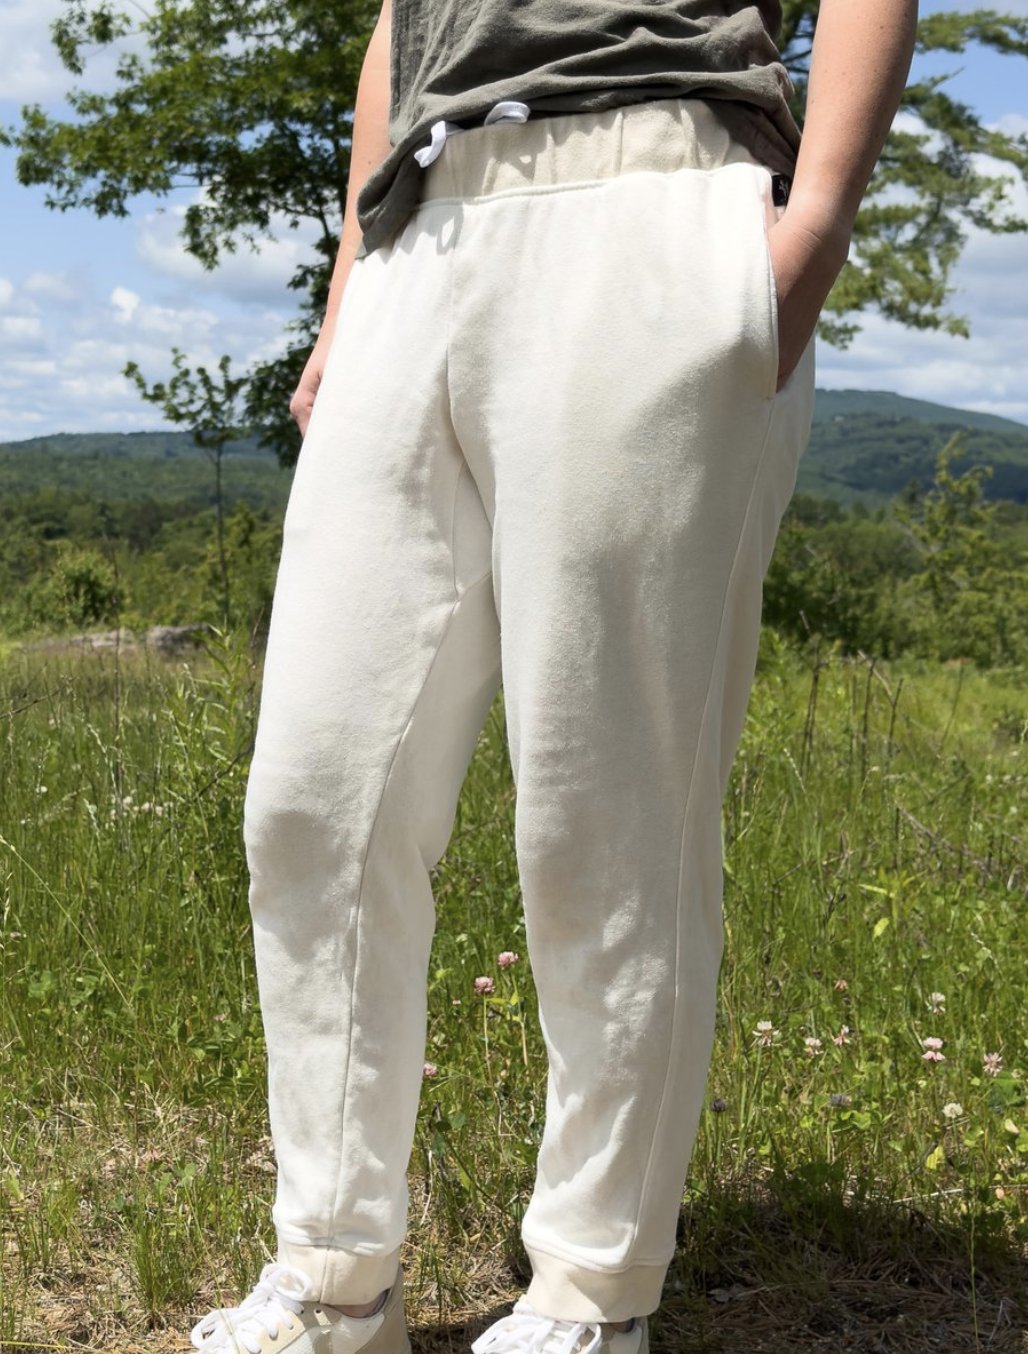 Twin Birch on X: Our Aspen sweatpants are a great item to pick up